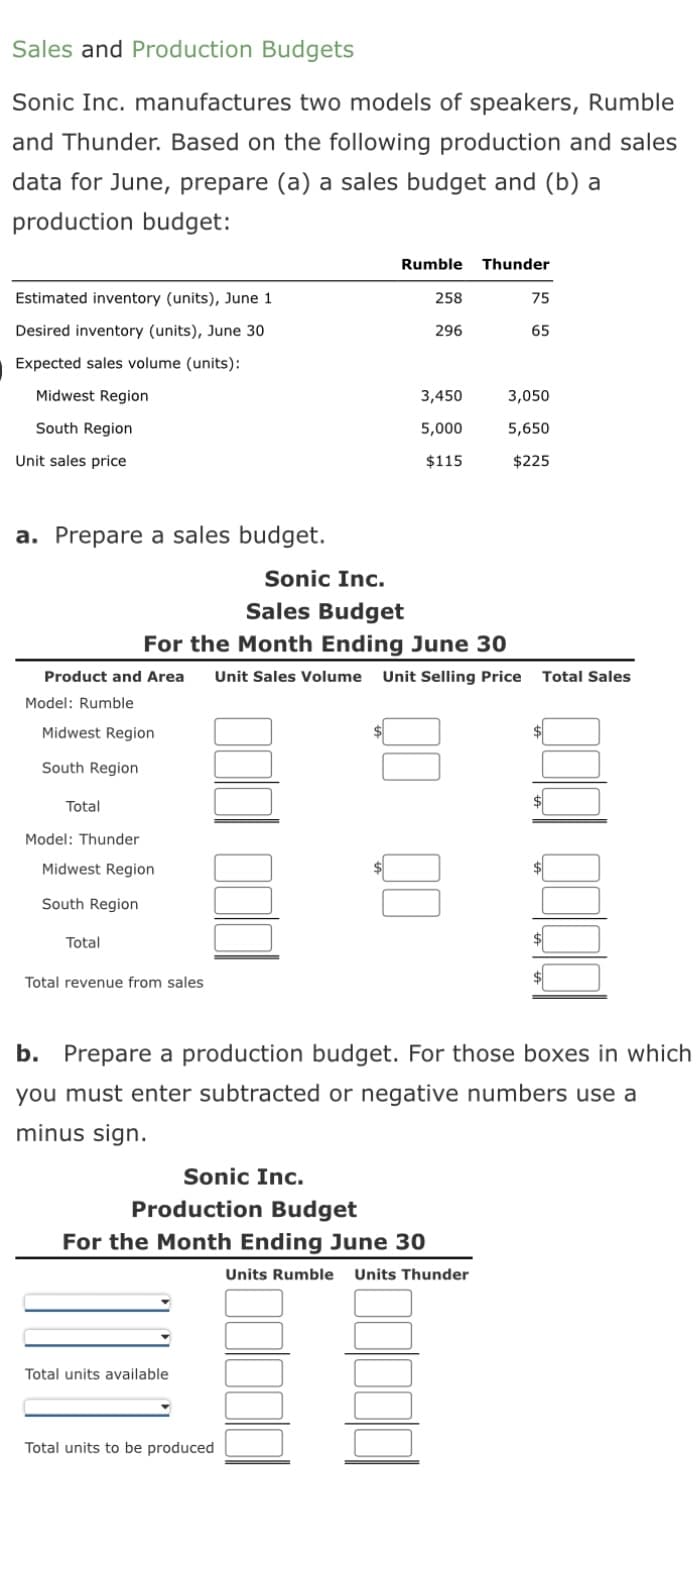 Sales and Production Budgets
Sonic Inc. manufactures two models of speakers, Rumble
and Thunder. Based on the following production and sales
data for June, prepare (a) a sales budget and (b) a
production budget:
Estimated inventory (units), June 1
Desired inventory (units), June 30
Expected sales volume (units):
Midwest Region
South Region
Unit sales price
a. Prepare a sales budget.
Midwest Region
South Region
Total
Model: Thunder
Midwest Region
South Region
Sonic Inc.
Sales Budget
For the Month Ending June 30
Product and Area Unit Sales Volume Unit Selling Price Total Sales
Model: Rumble
Total
Total revenue from sales
Rumble Thunder
$
Total units available
Total units to be produced
258
296
3,450
5,000
$115
Sonic Inc.
Production Budget
For the Month Ending June 30
75
65
b. Prepare a production budget. For those boxes in which
you must enter subtracted or negative numbers use a
minus sign.
3,050
5,650
$225
Units Rumble Units Thunder
$